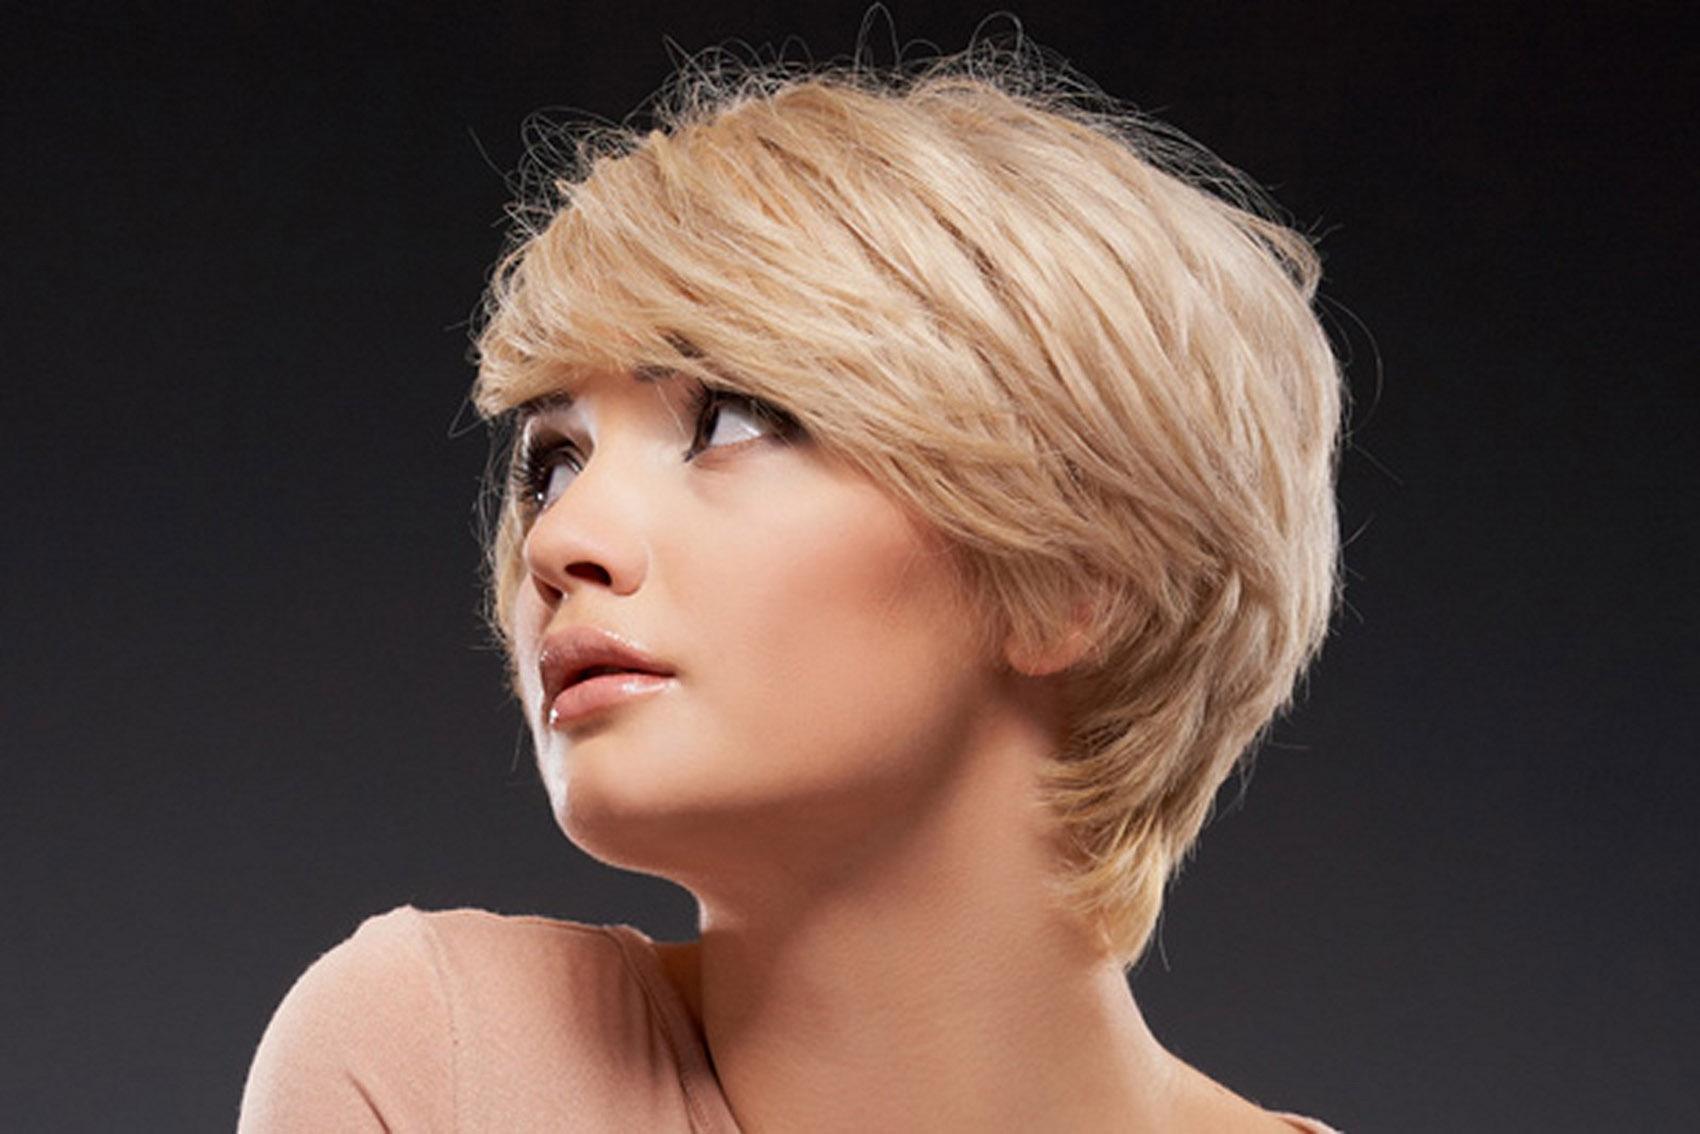 11 Perks Of Short Hair That May Change Your Perspective